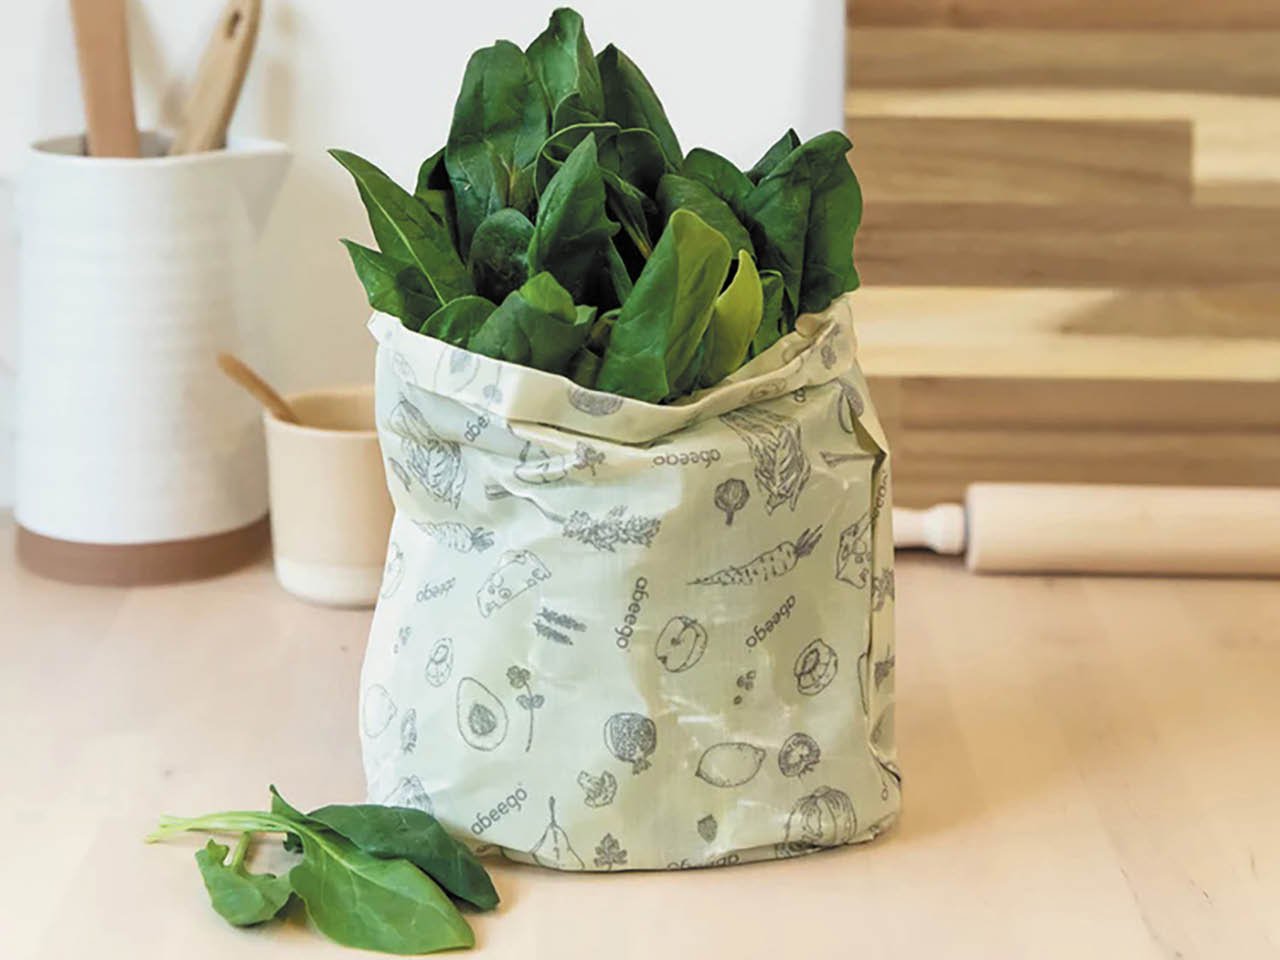 An abeego beeswax wrap wrapped around a bundle of lettuce